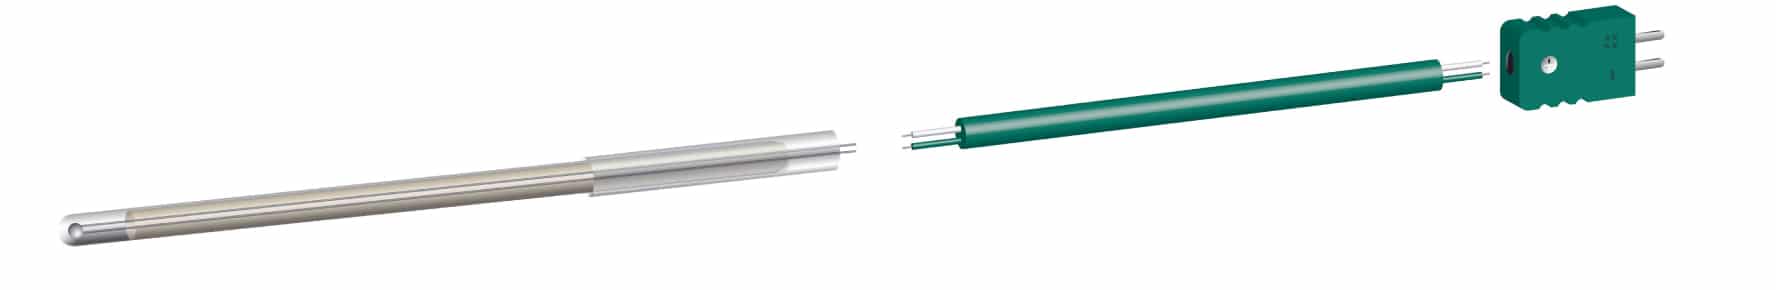 Structure sheath thermocouple, modular system, sheath thermocouples different types.